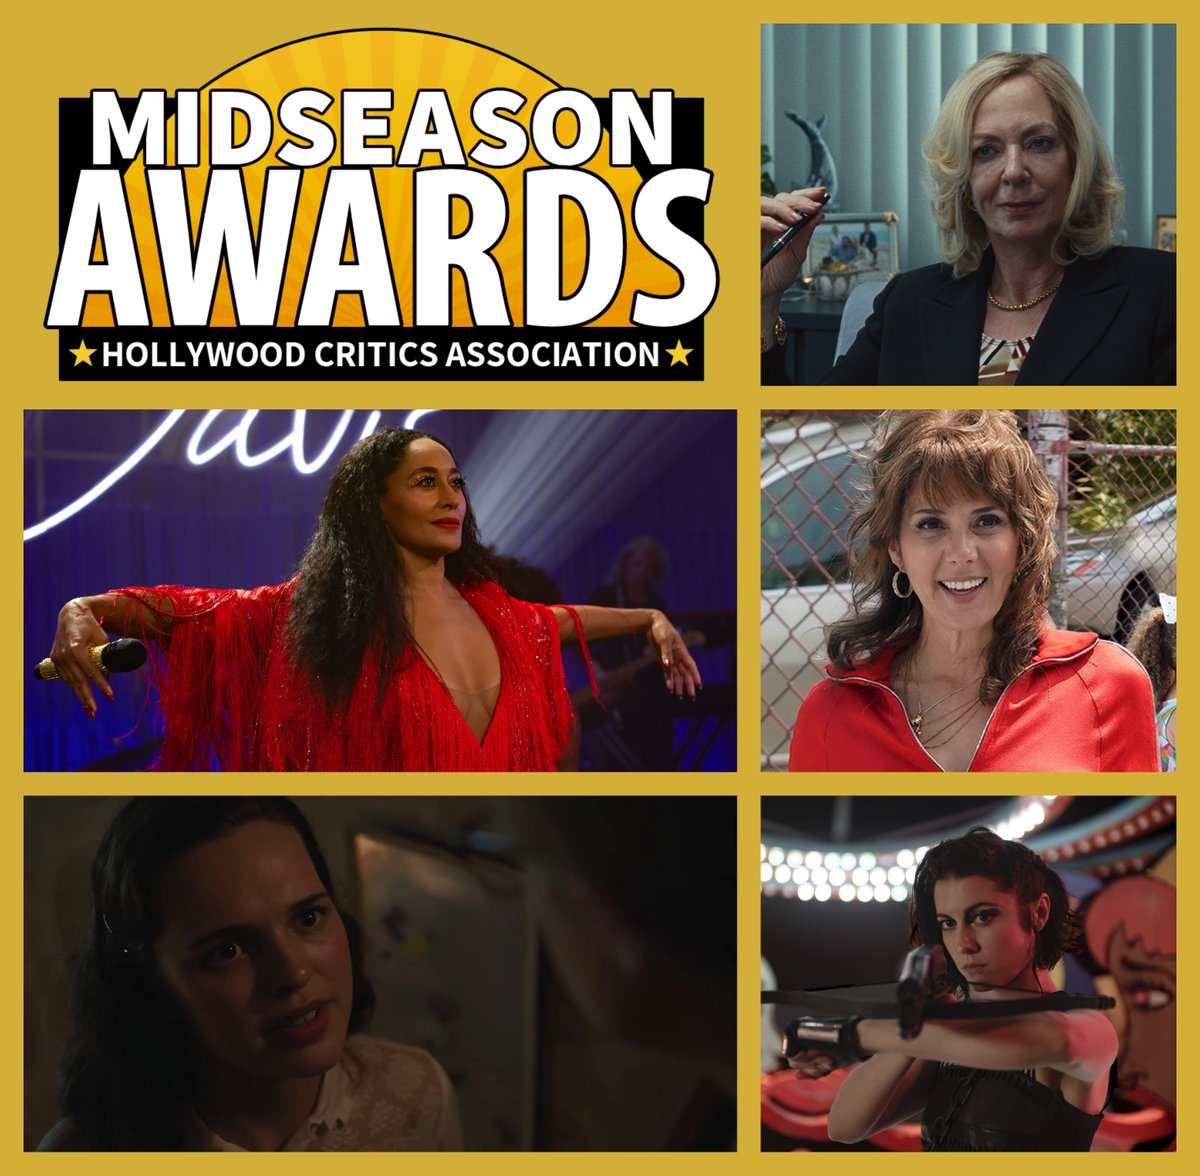 The nominees for Best Supporting Actress are:Allison Janney, Bad Education Marisa Tomei, The King of Staten Island Mary Elizabeth Winstead, Birds of PreyOdessa Young, Shirley Tracee Ellis Ross, The High Note  #TheHighNote  #Shirley  #BirdsofPrey  #BadEducation  #HBO